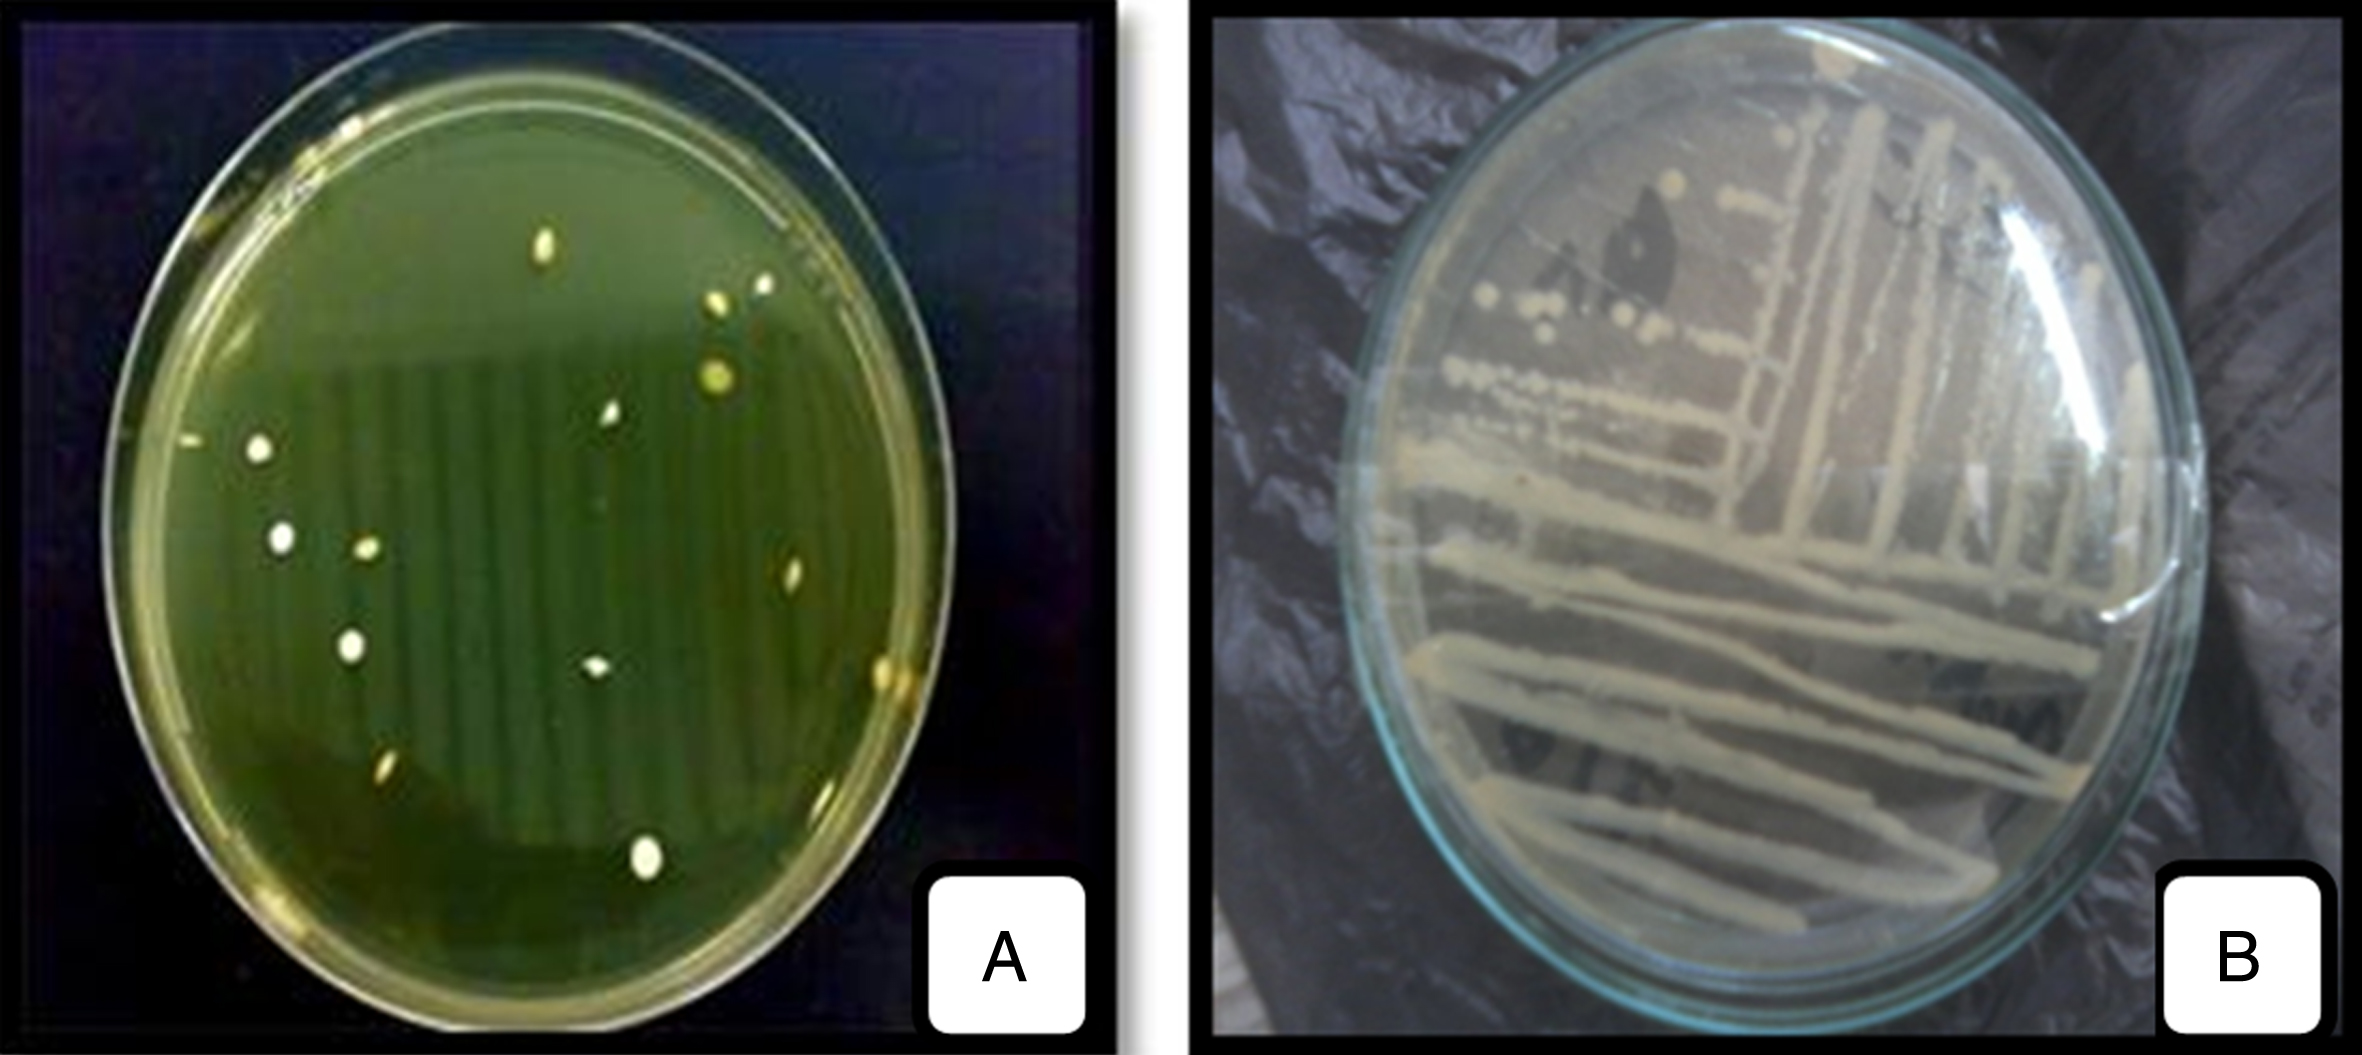 Macroscopic observation of LAB isolated (A) and purified (B) strains on Agar medium.